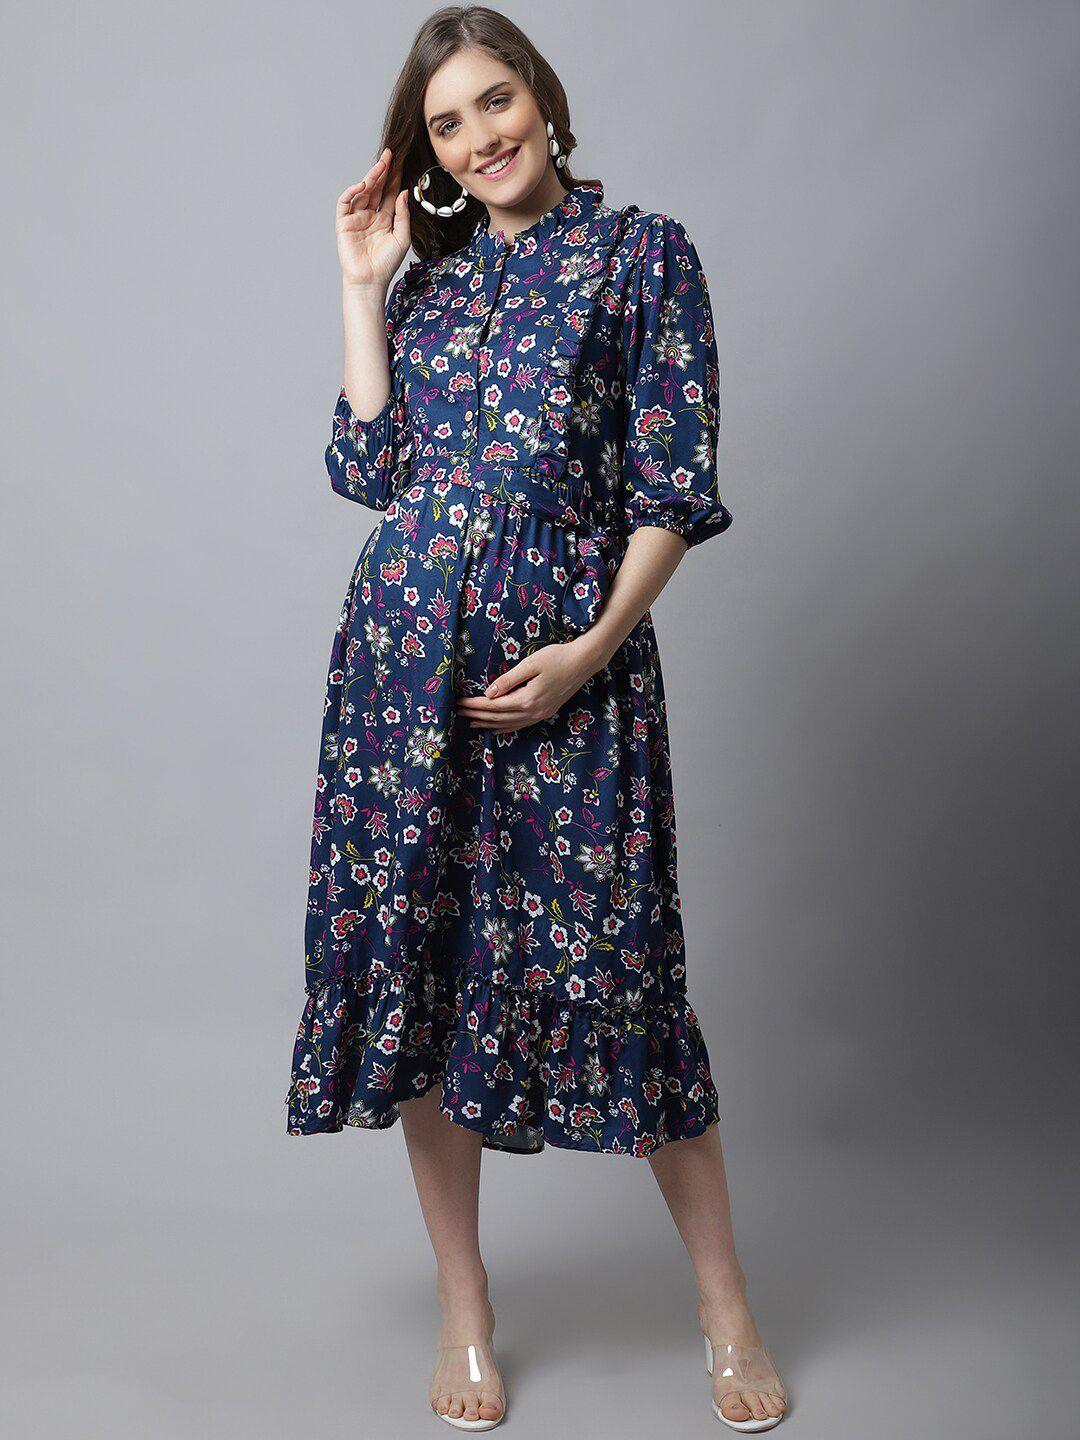 frempy navy blue & pink floral printed maternity a-line midi dress